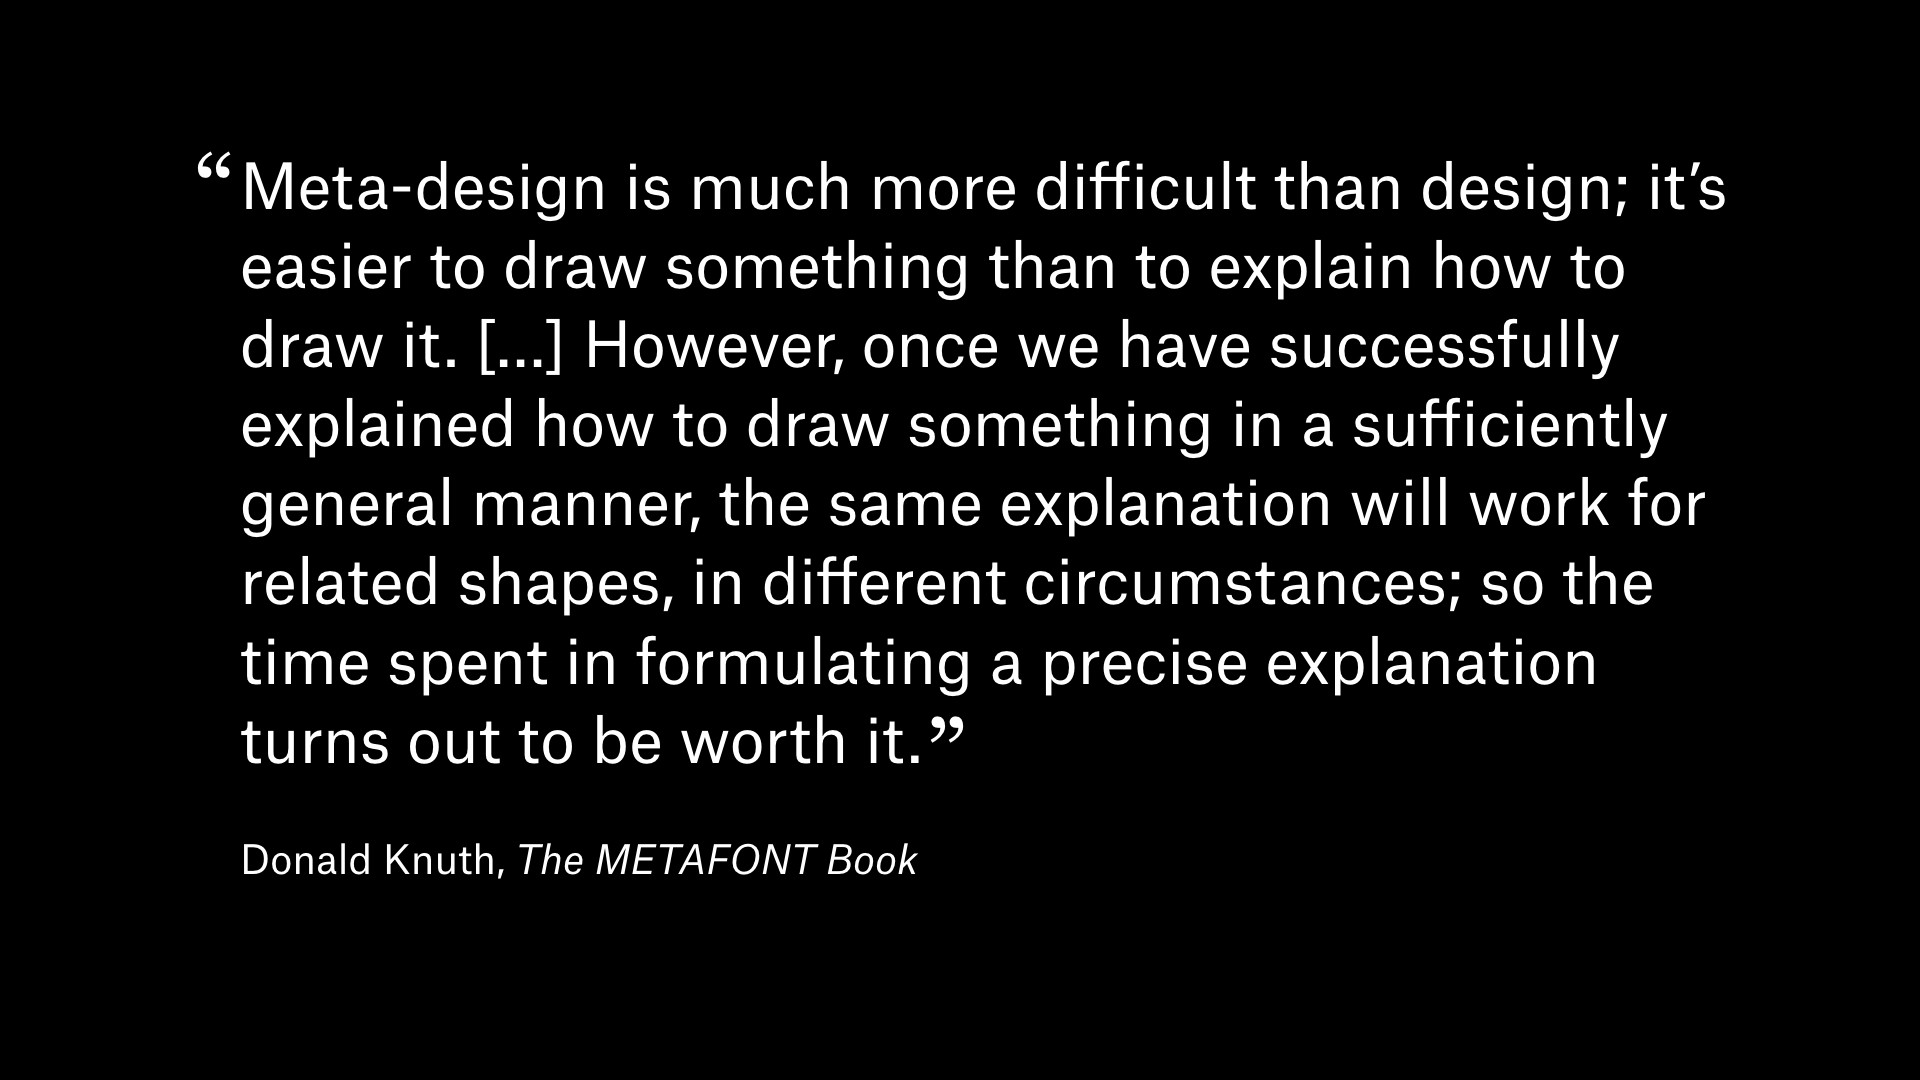 Quote by Donal Knuth: “Meta-design is much more difficult than design; it is easier to draw something than to explain how to draw it. [...] However, once we have successfully explained how to draw something in a sufficiently general manner, the same explanation will work for related shapes, in different circumstances; so the time spent in formulating a precise explanation turns out to be worth it.”